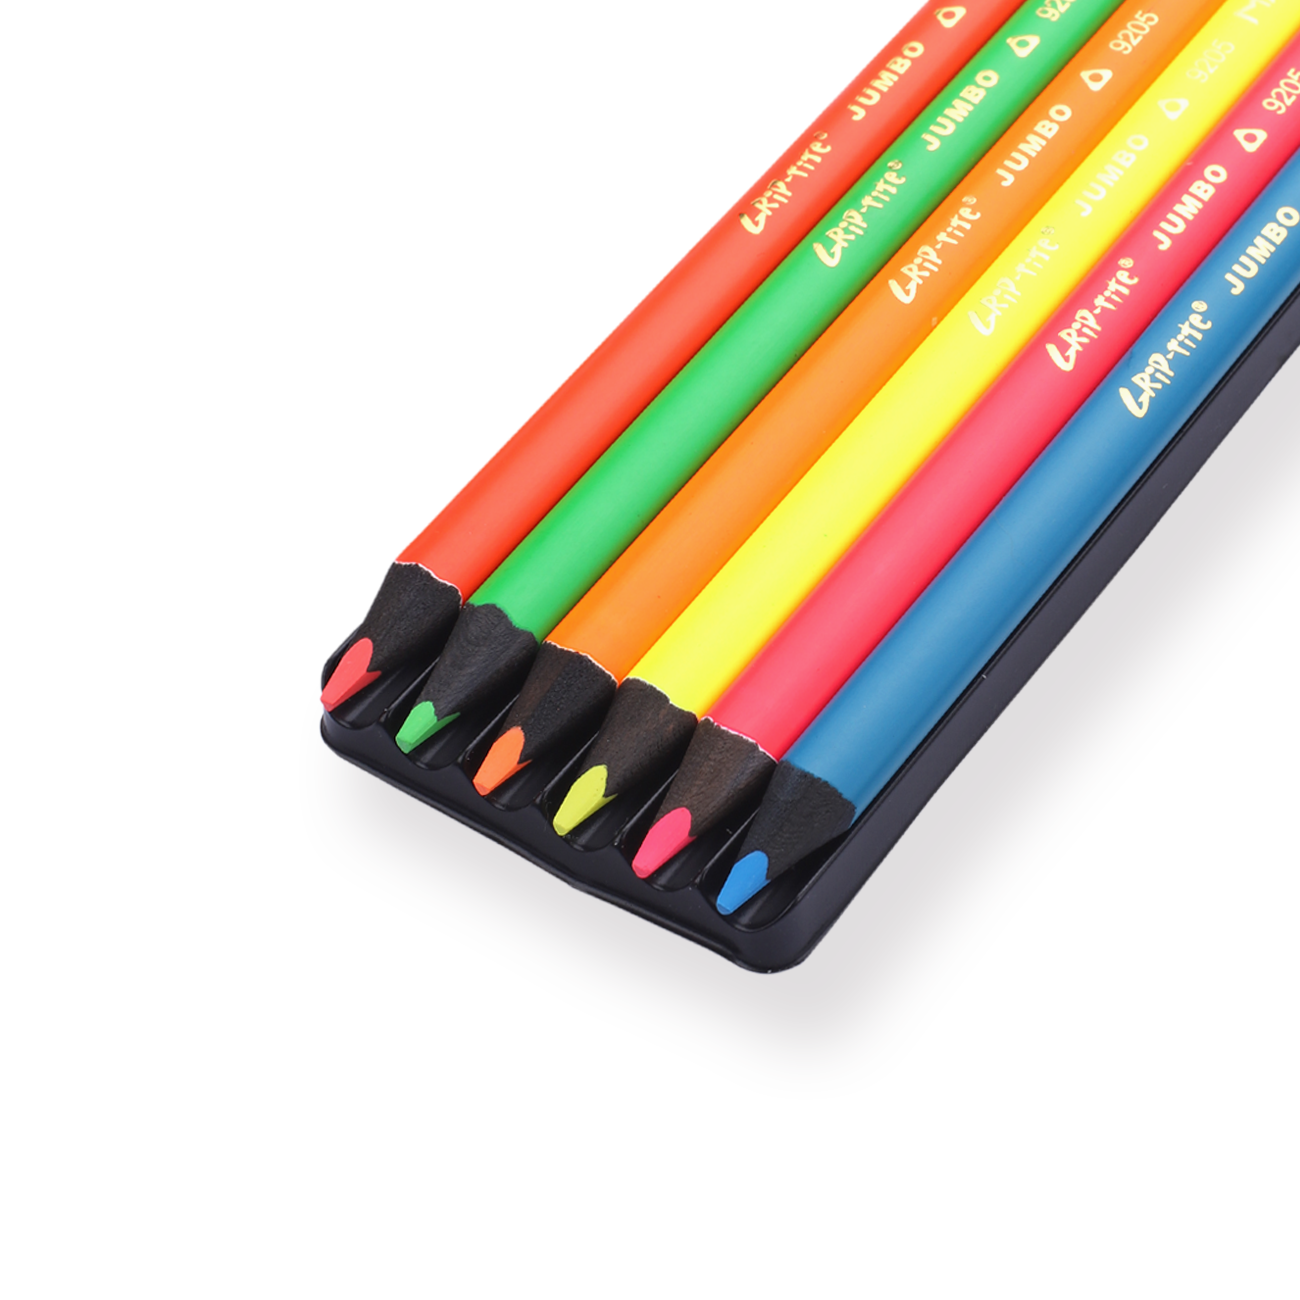 Ooly Jumbo Brights Neon Colored Pencils - Set of 6